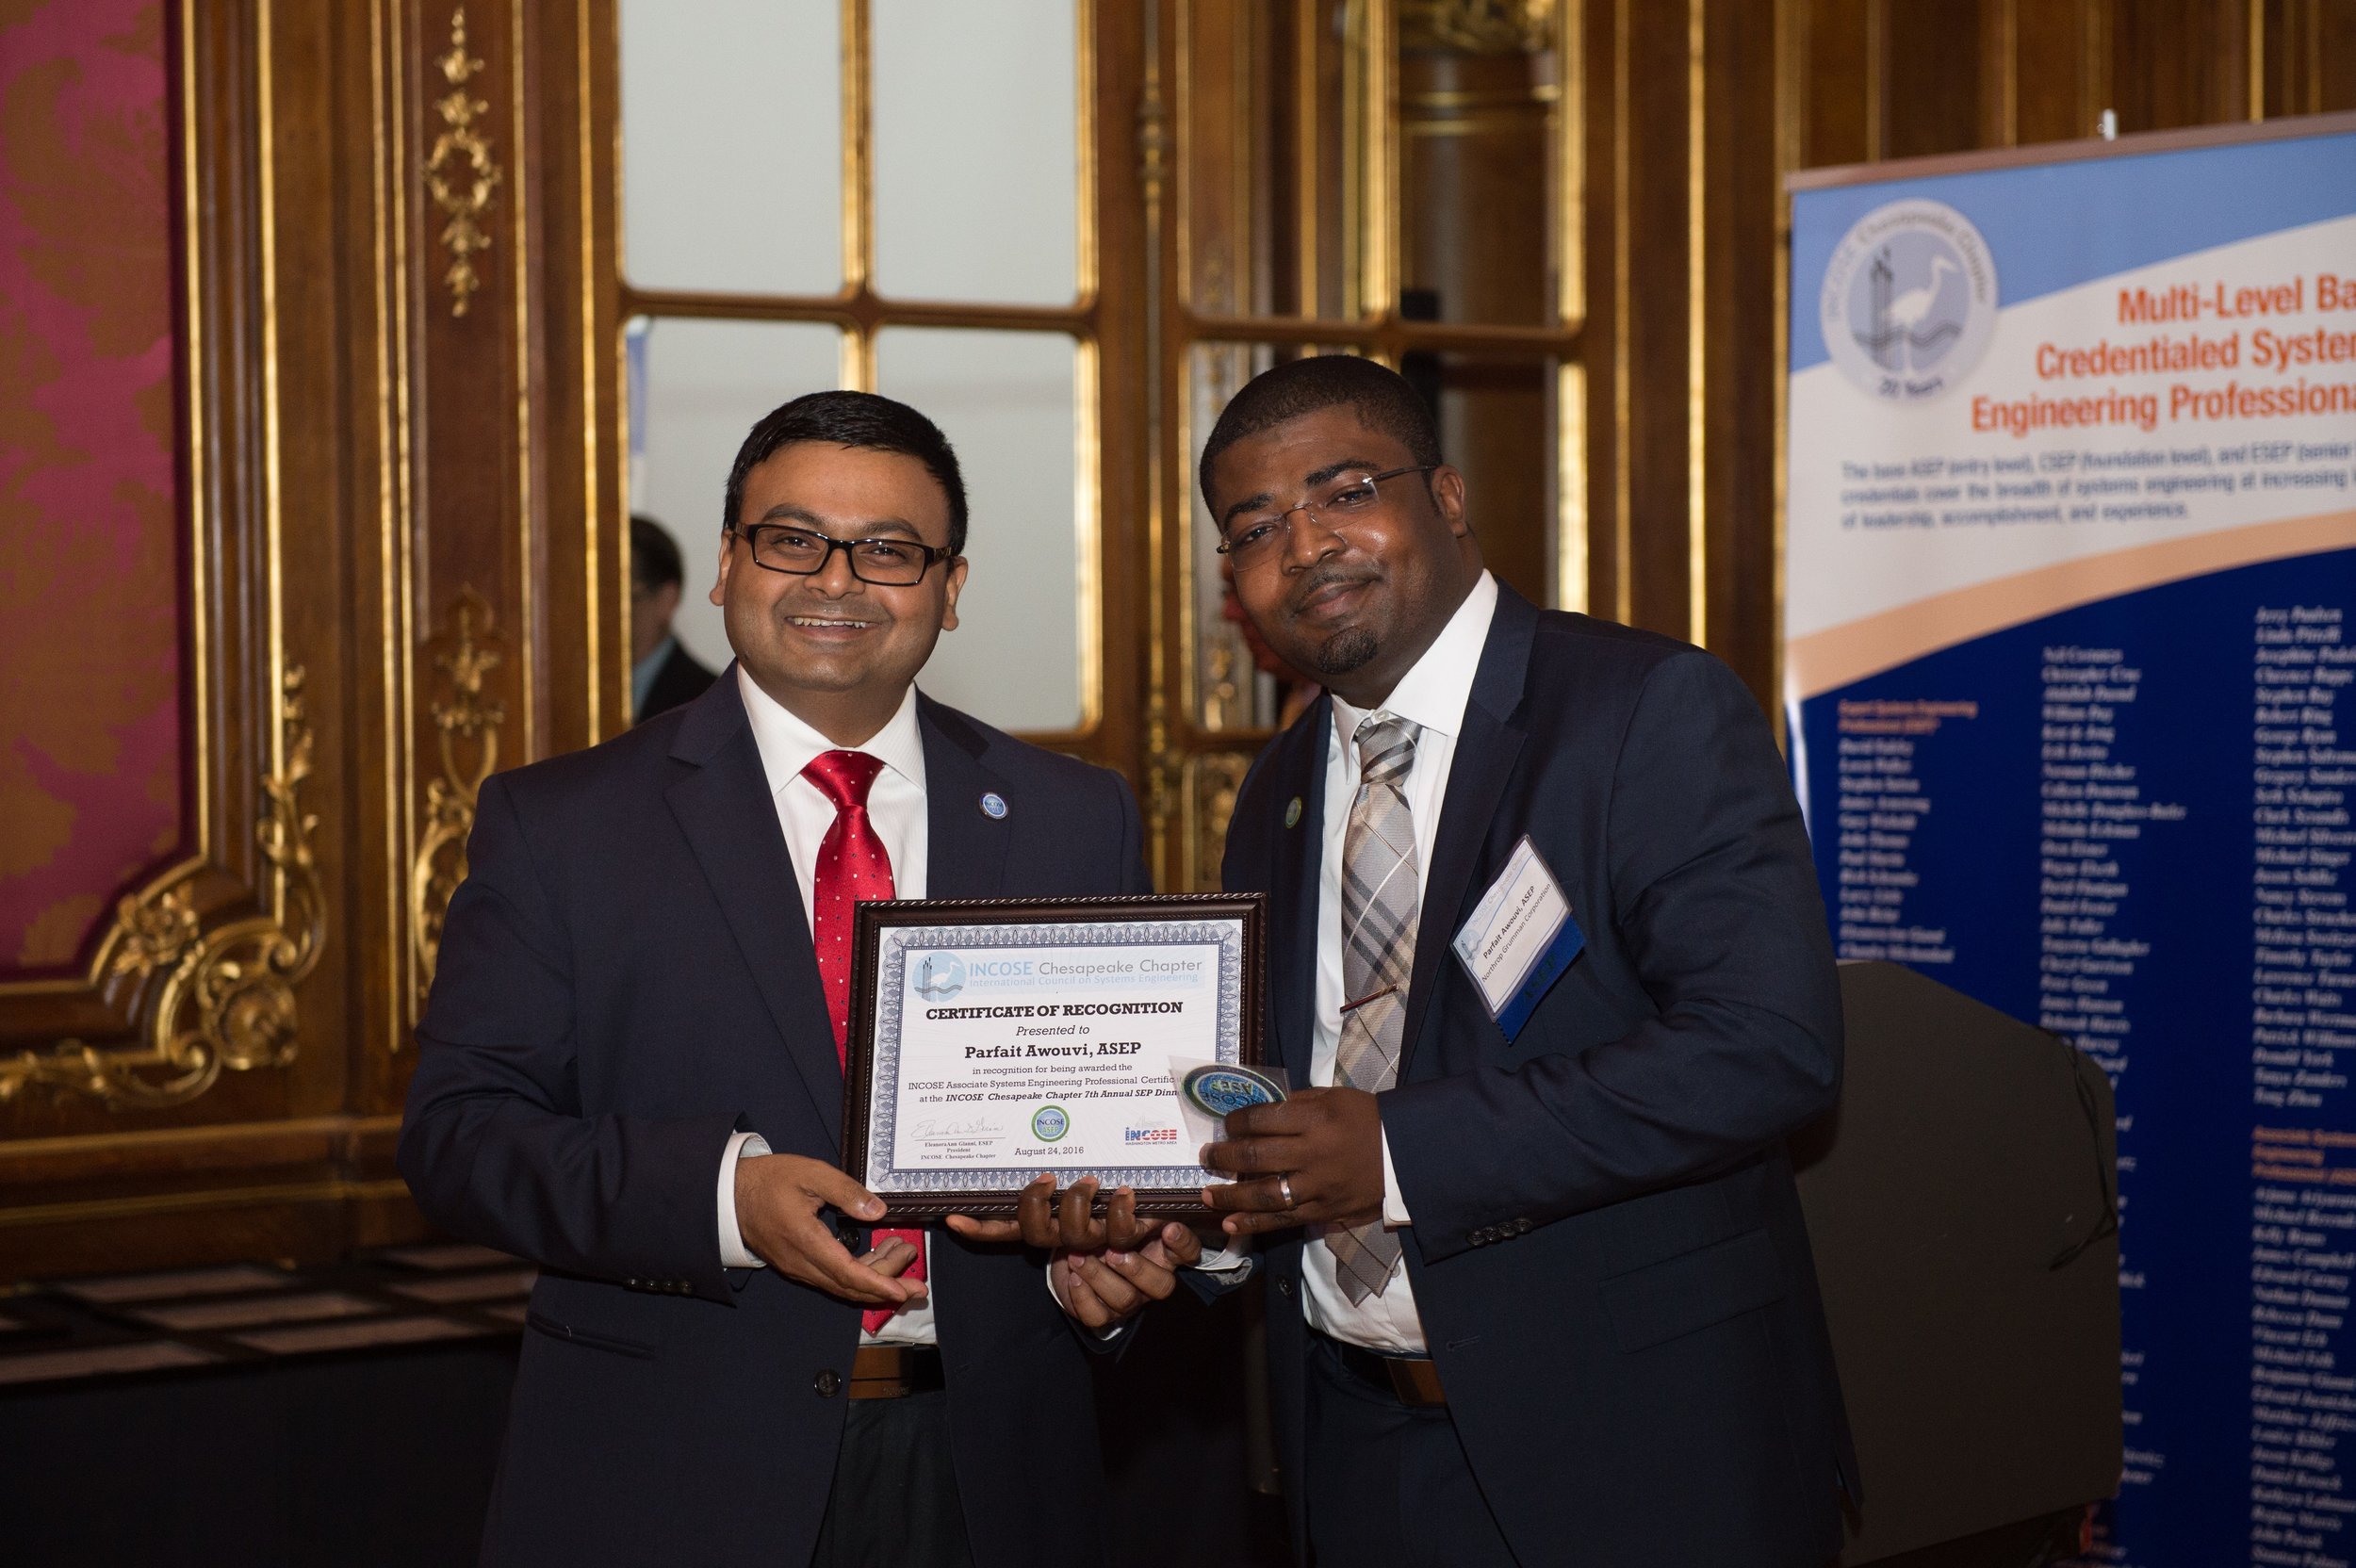 Dr. Muhamad Islam, CSEP, President of WMA, presents an ASEP Certificate of Recognition to Mr. Parfait Awouvi from Northrop Grumman Corporation.